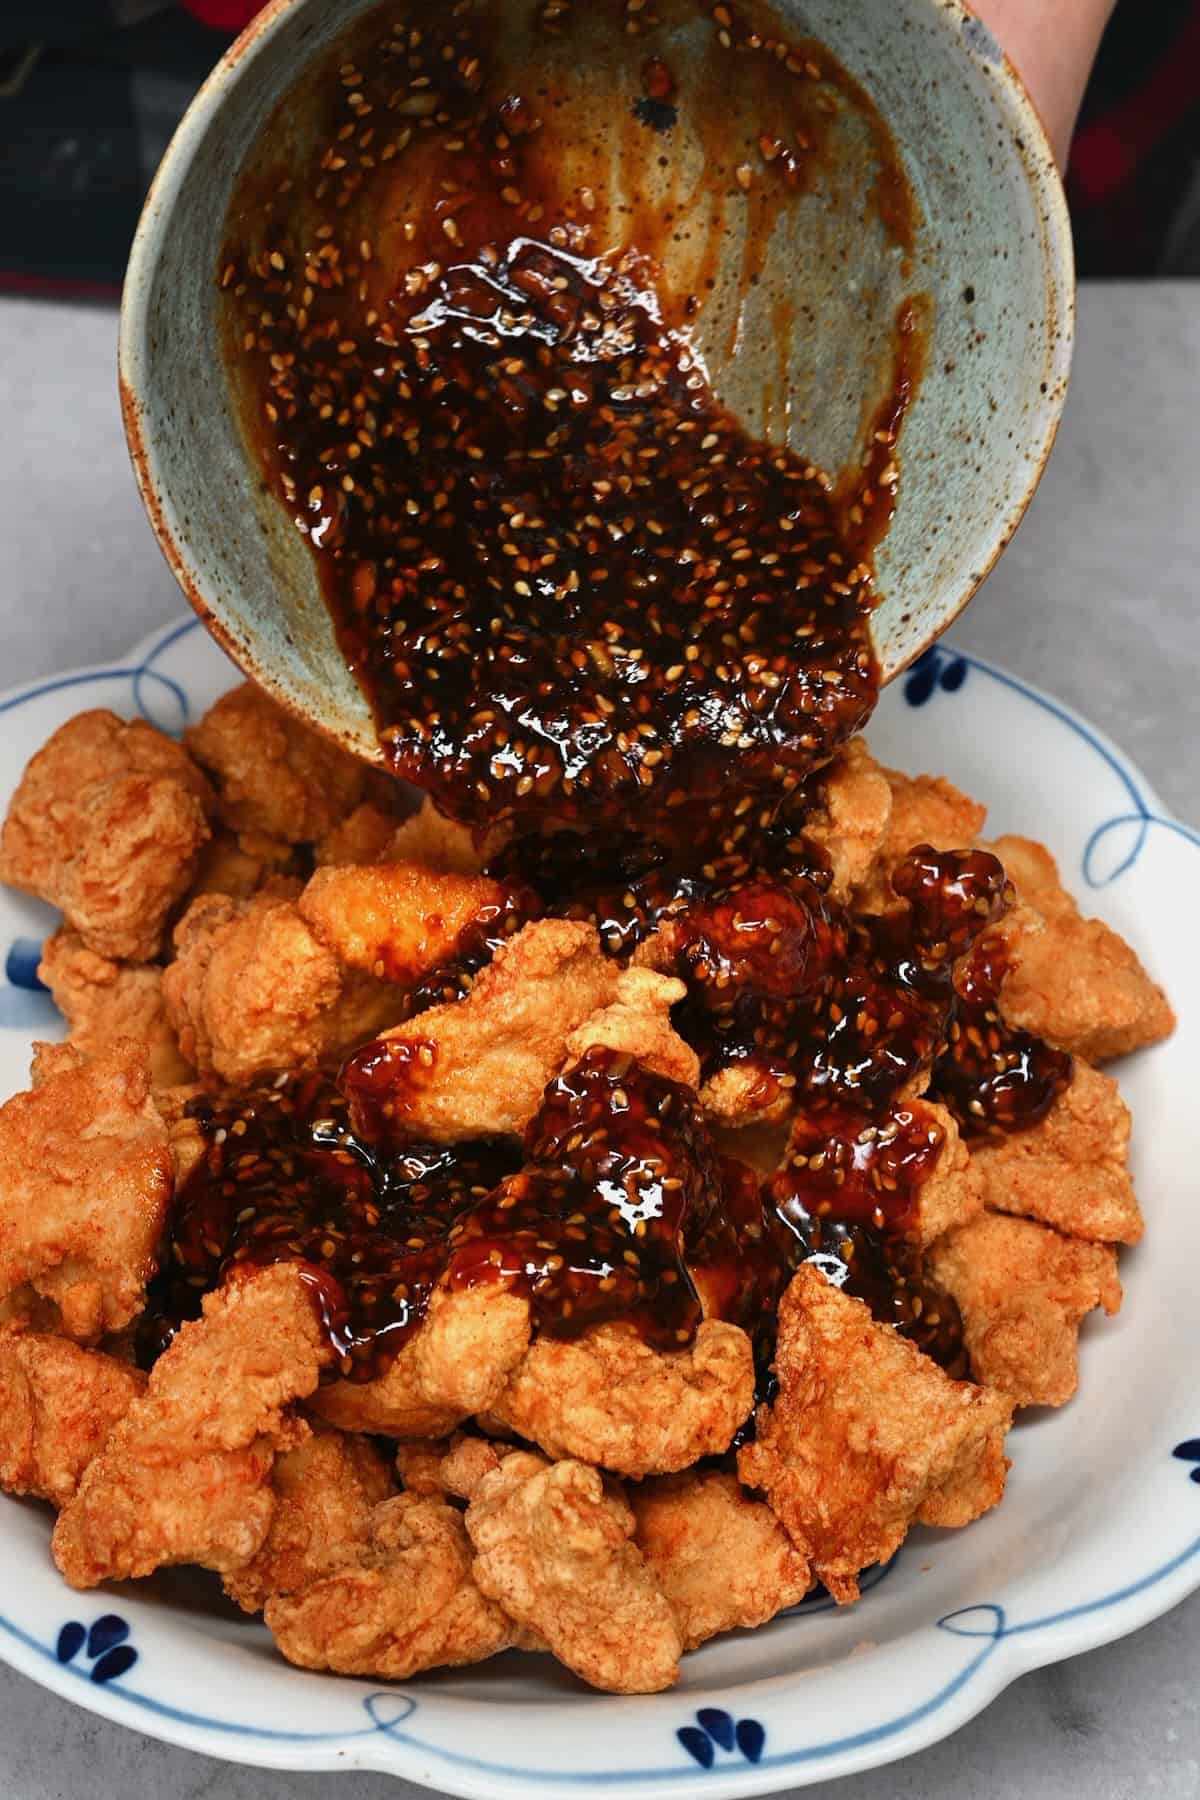 Mixing fried chicken with sesame sauce